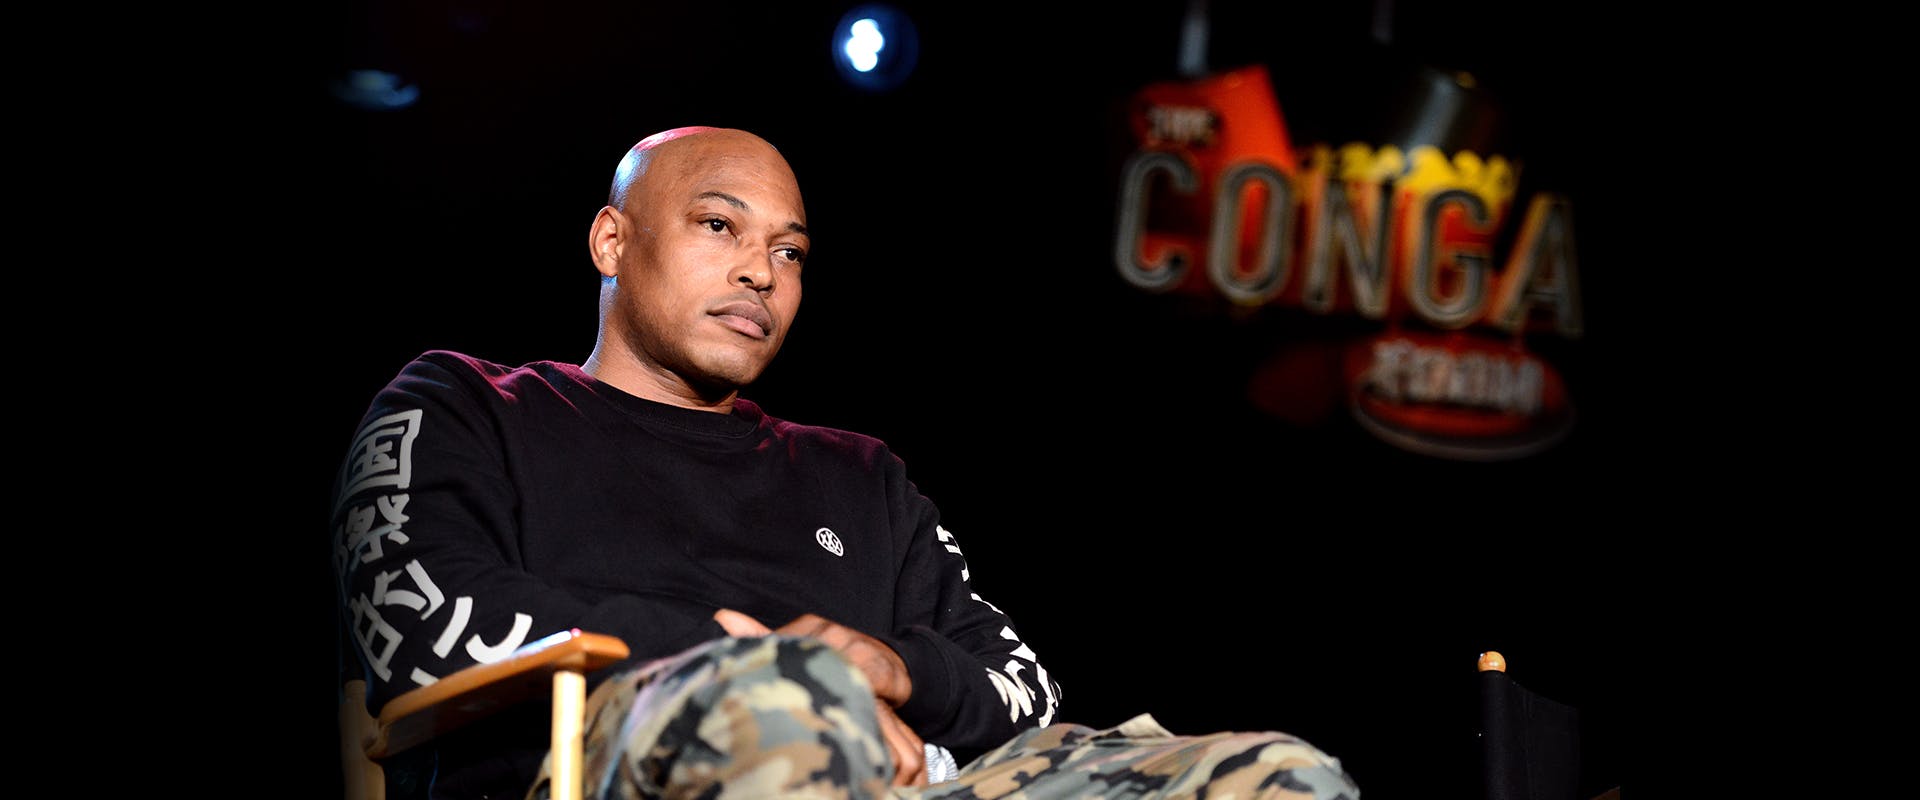 LOS ANGELES, CA - JUNE 14: Rapper/actor Sticky Fingaz attends Diversity Speaks at the Los Angeles Film Festival hosted by Blackhouse: Cine-Sounds during the 2014 Los Angeles Film Festival at The Conga Room at L.A. Live on June 14, 2014 in Los Angeles, California.